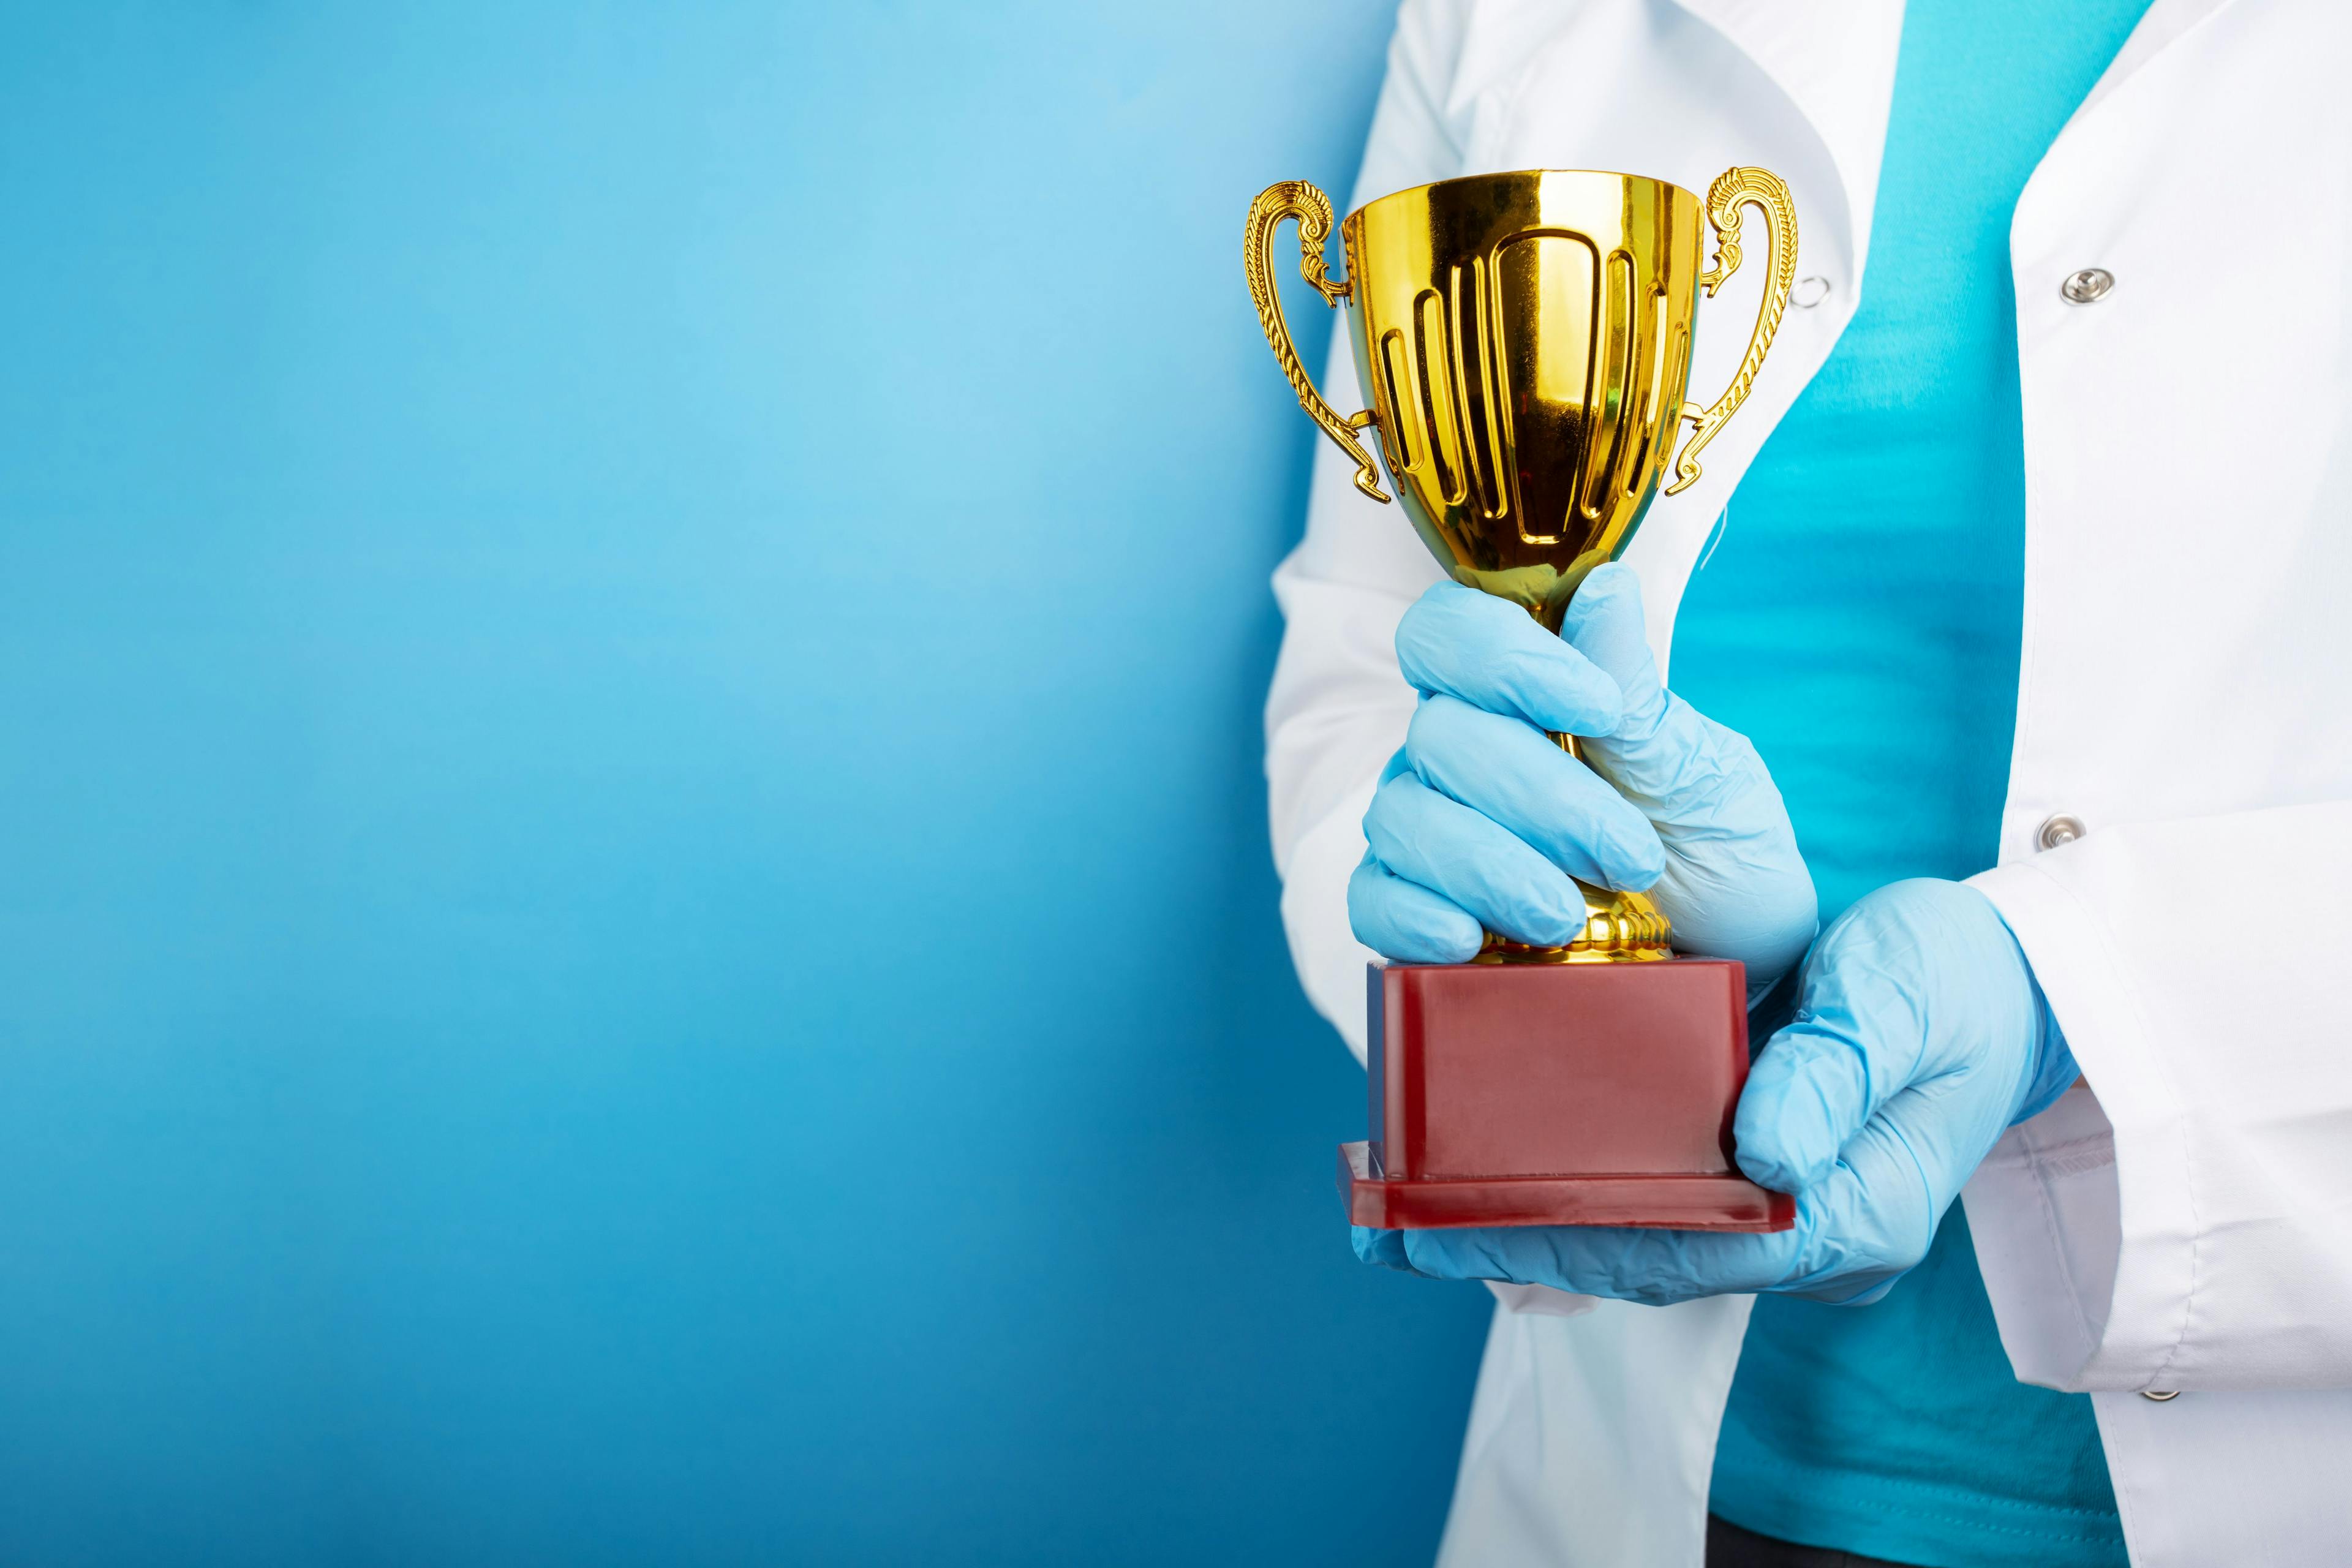 medical award, golden cup in doctor's hands, healthcare and medicine. Image Credit: Adobe Stock Images/yta